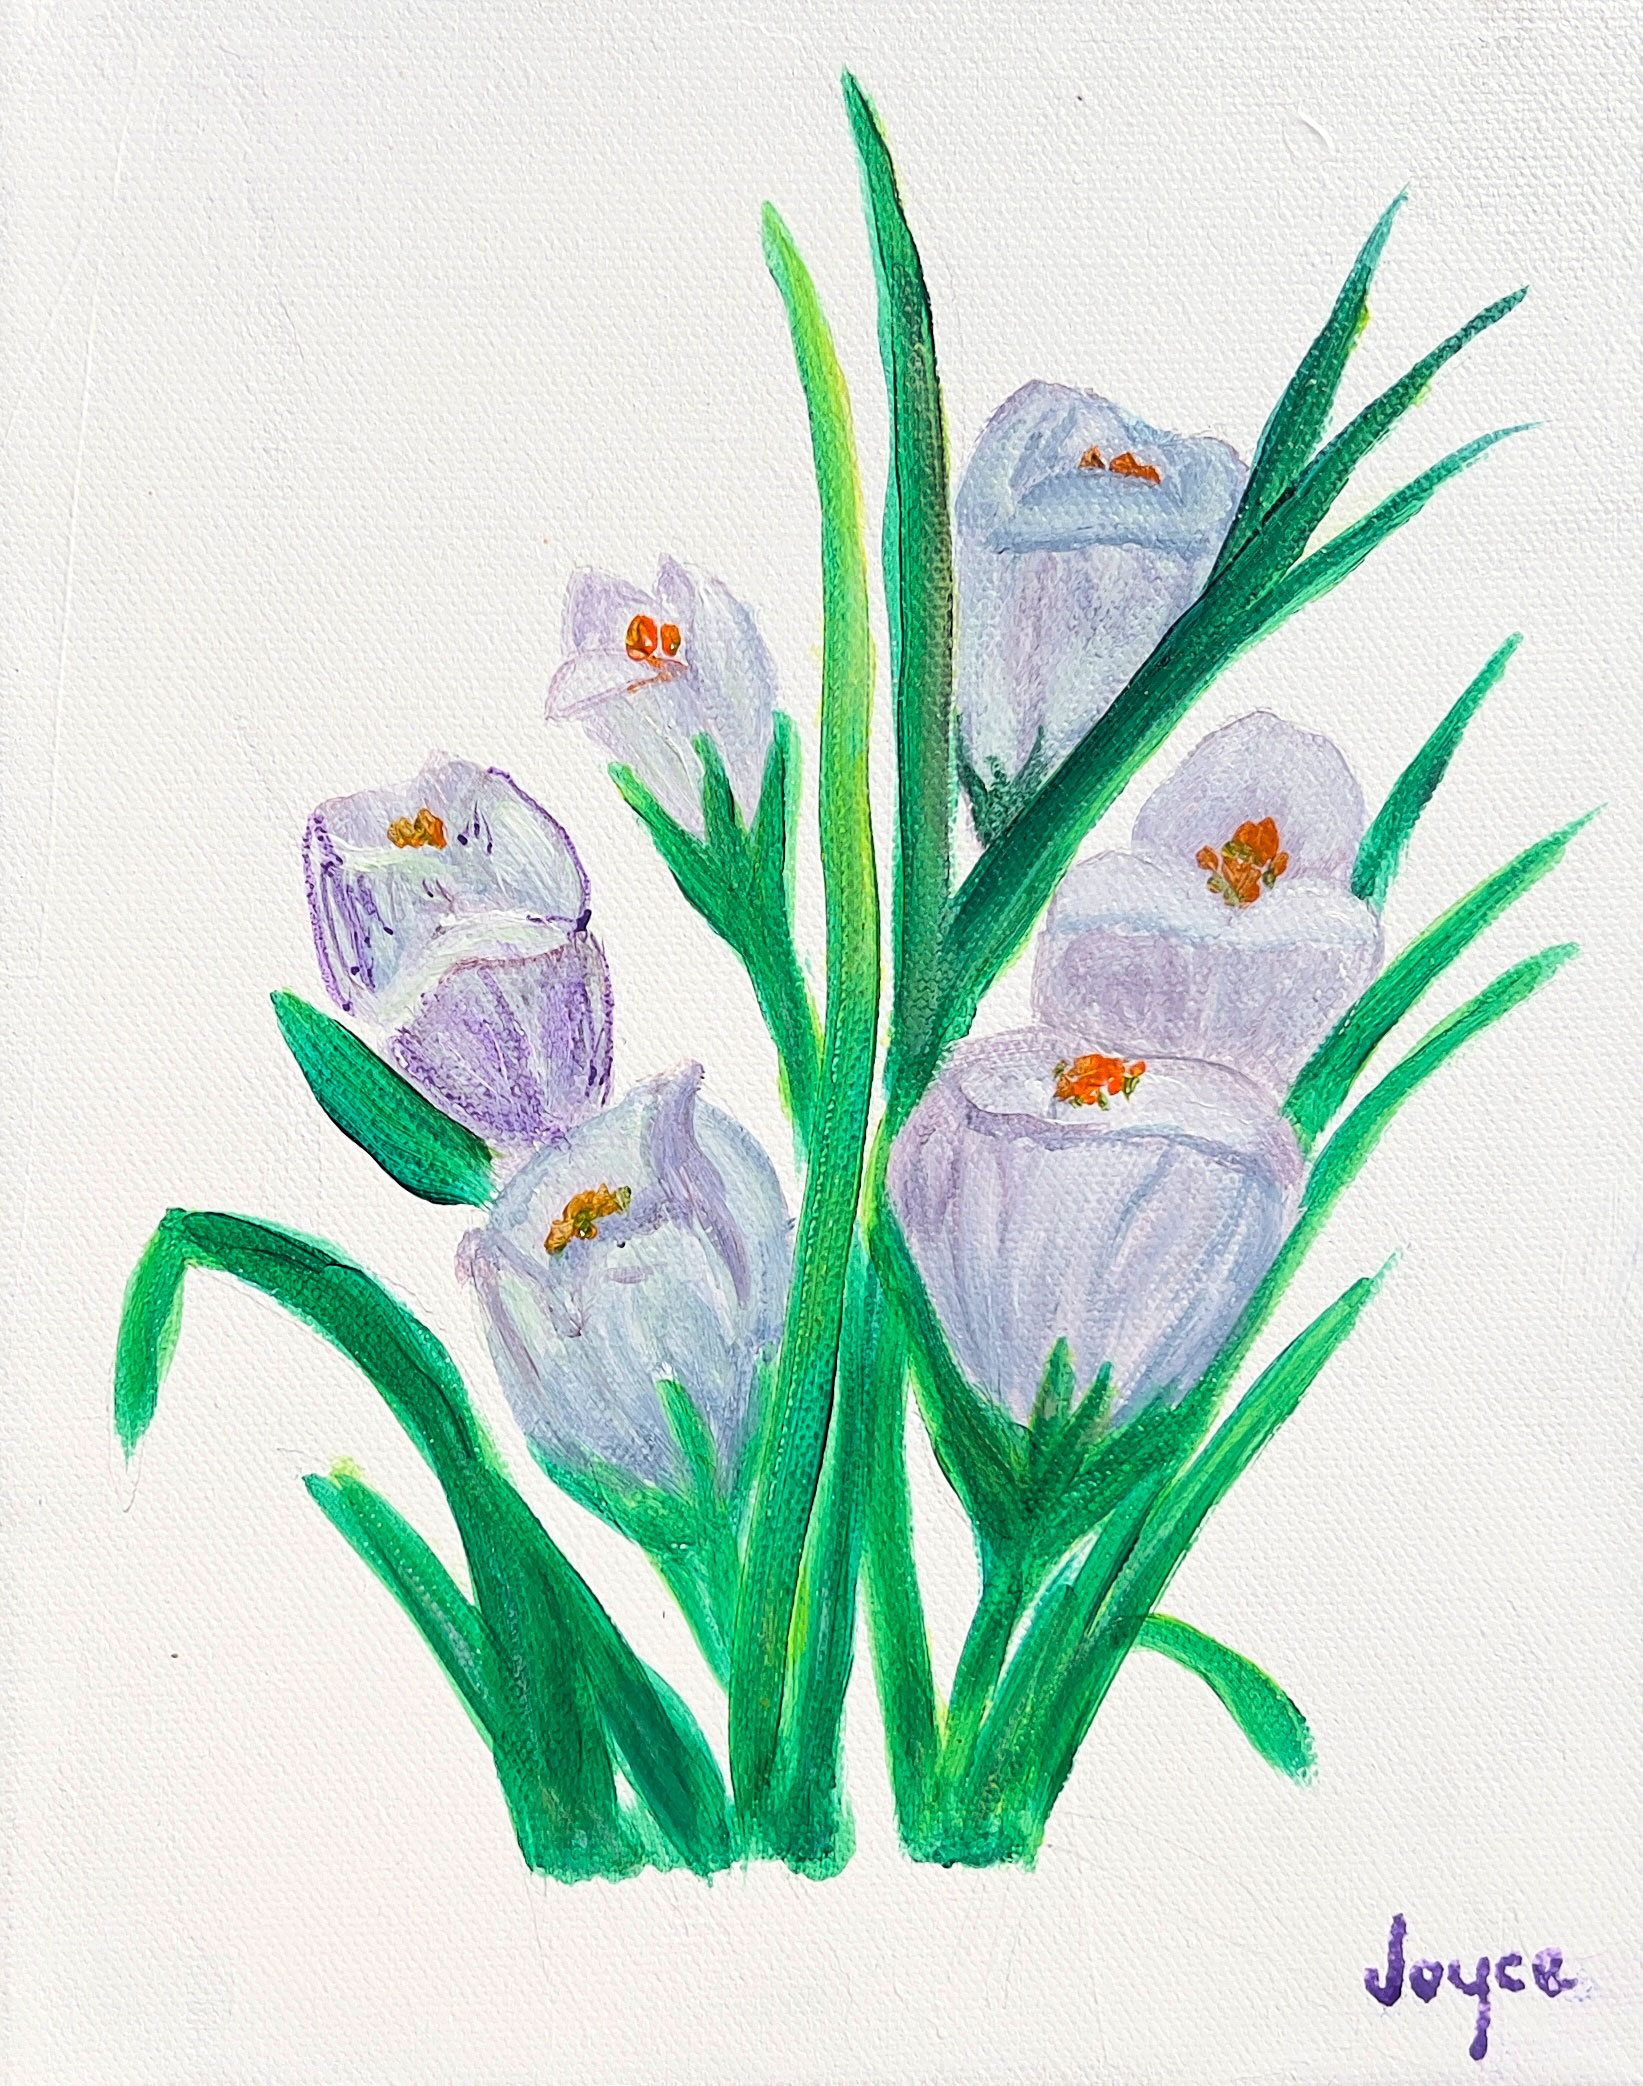 Crocusses painting by Joyce Frederick